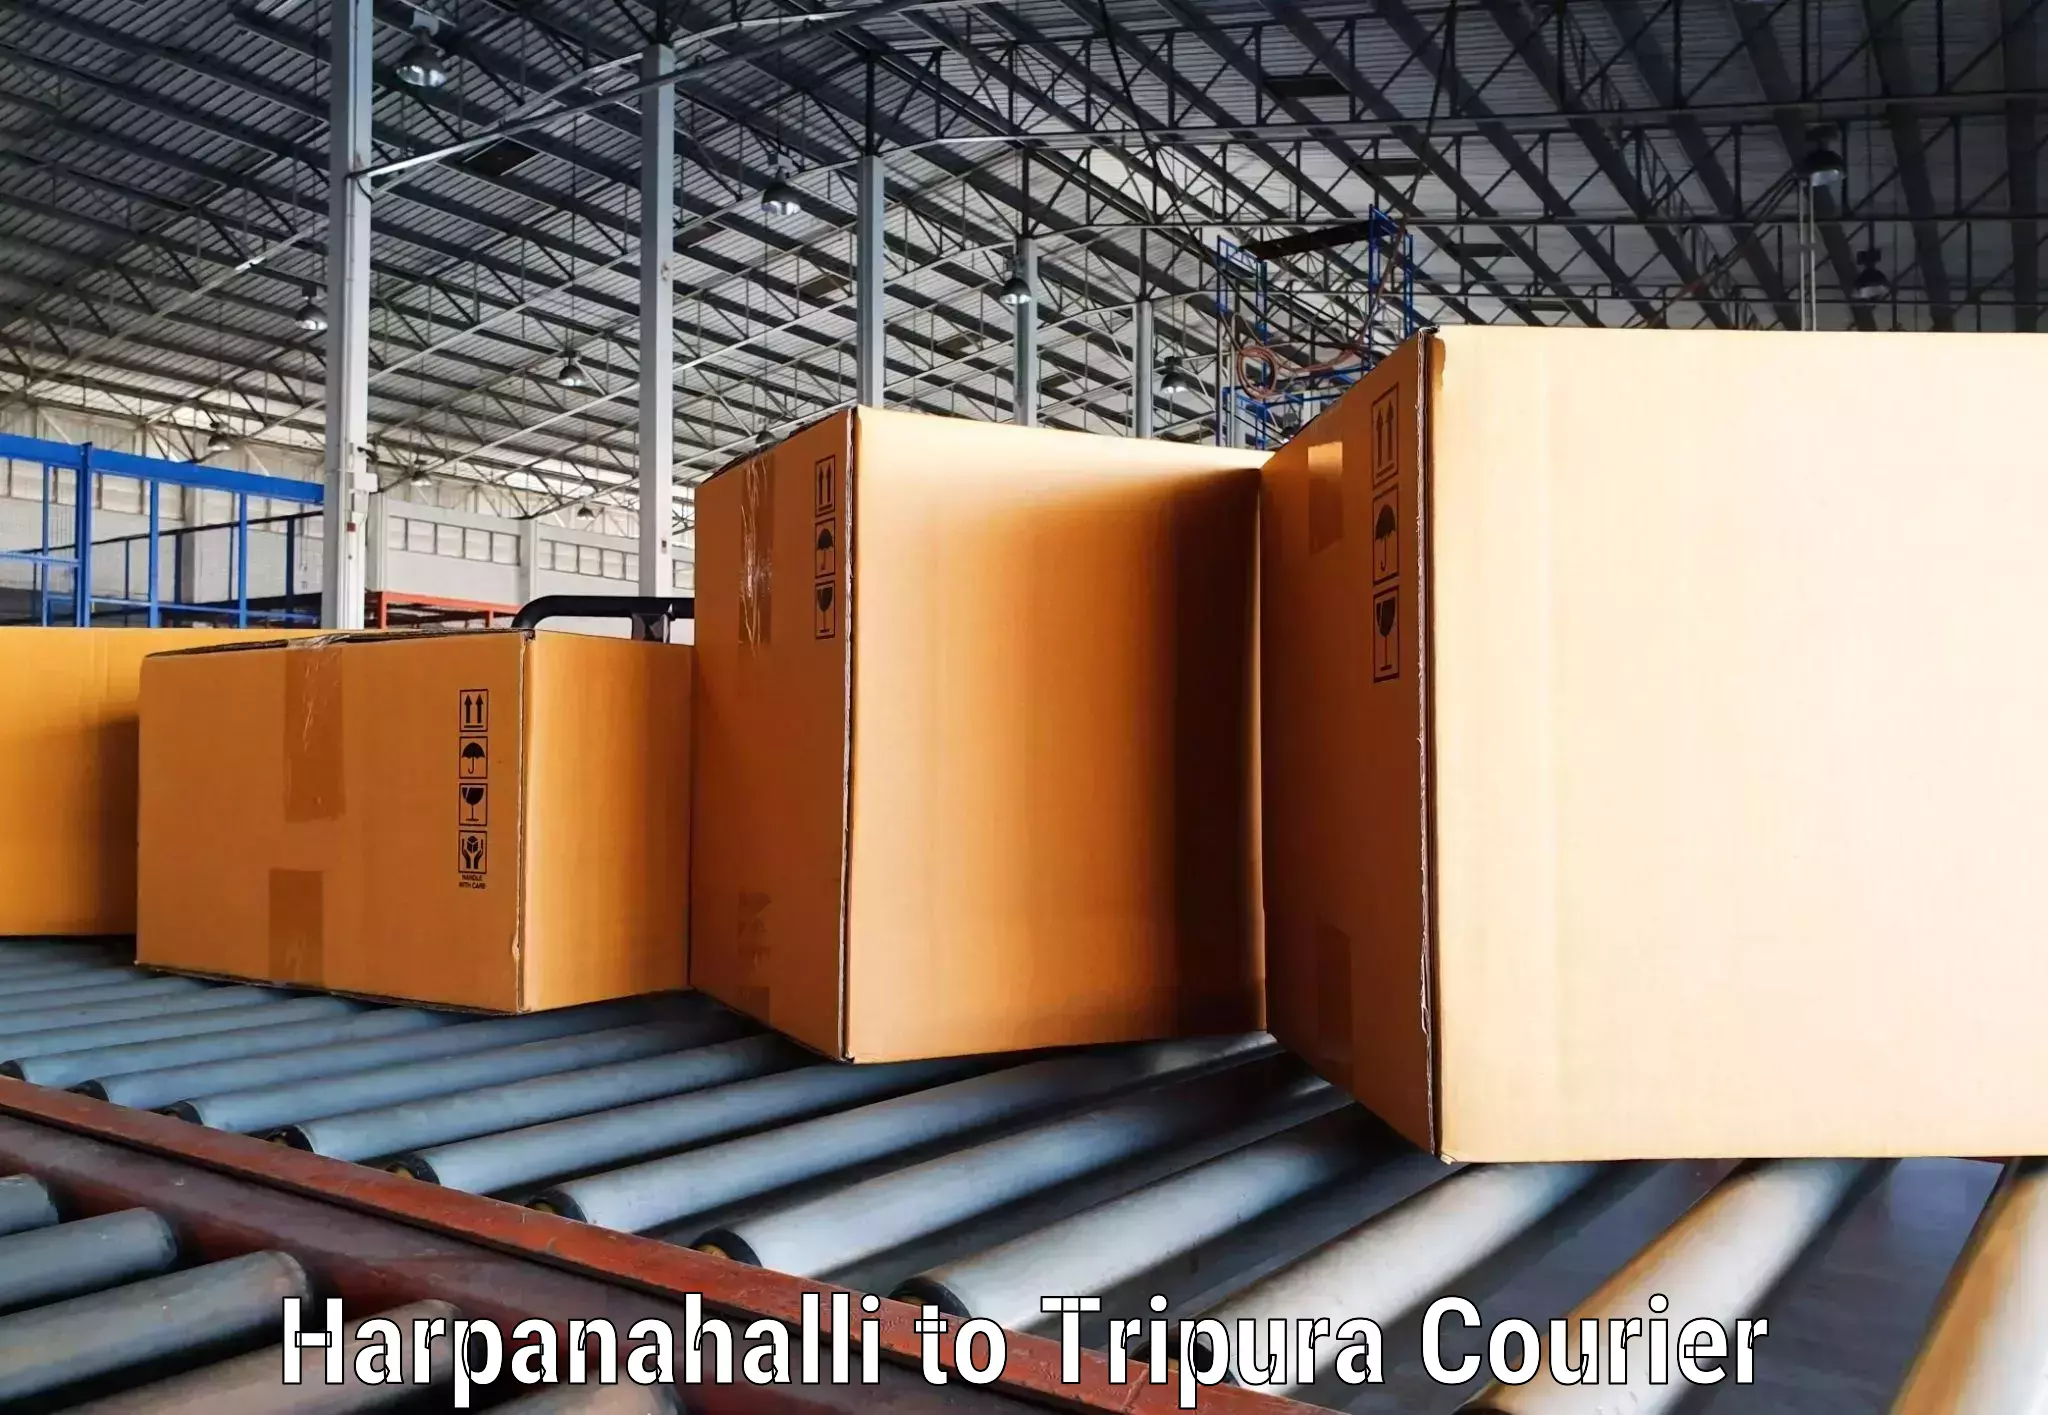 Online package tracking Harpanahalli to Tripura